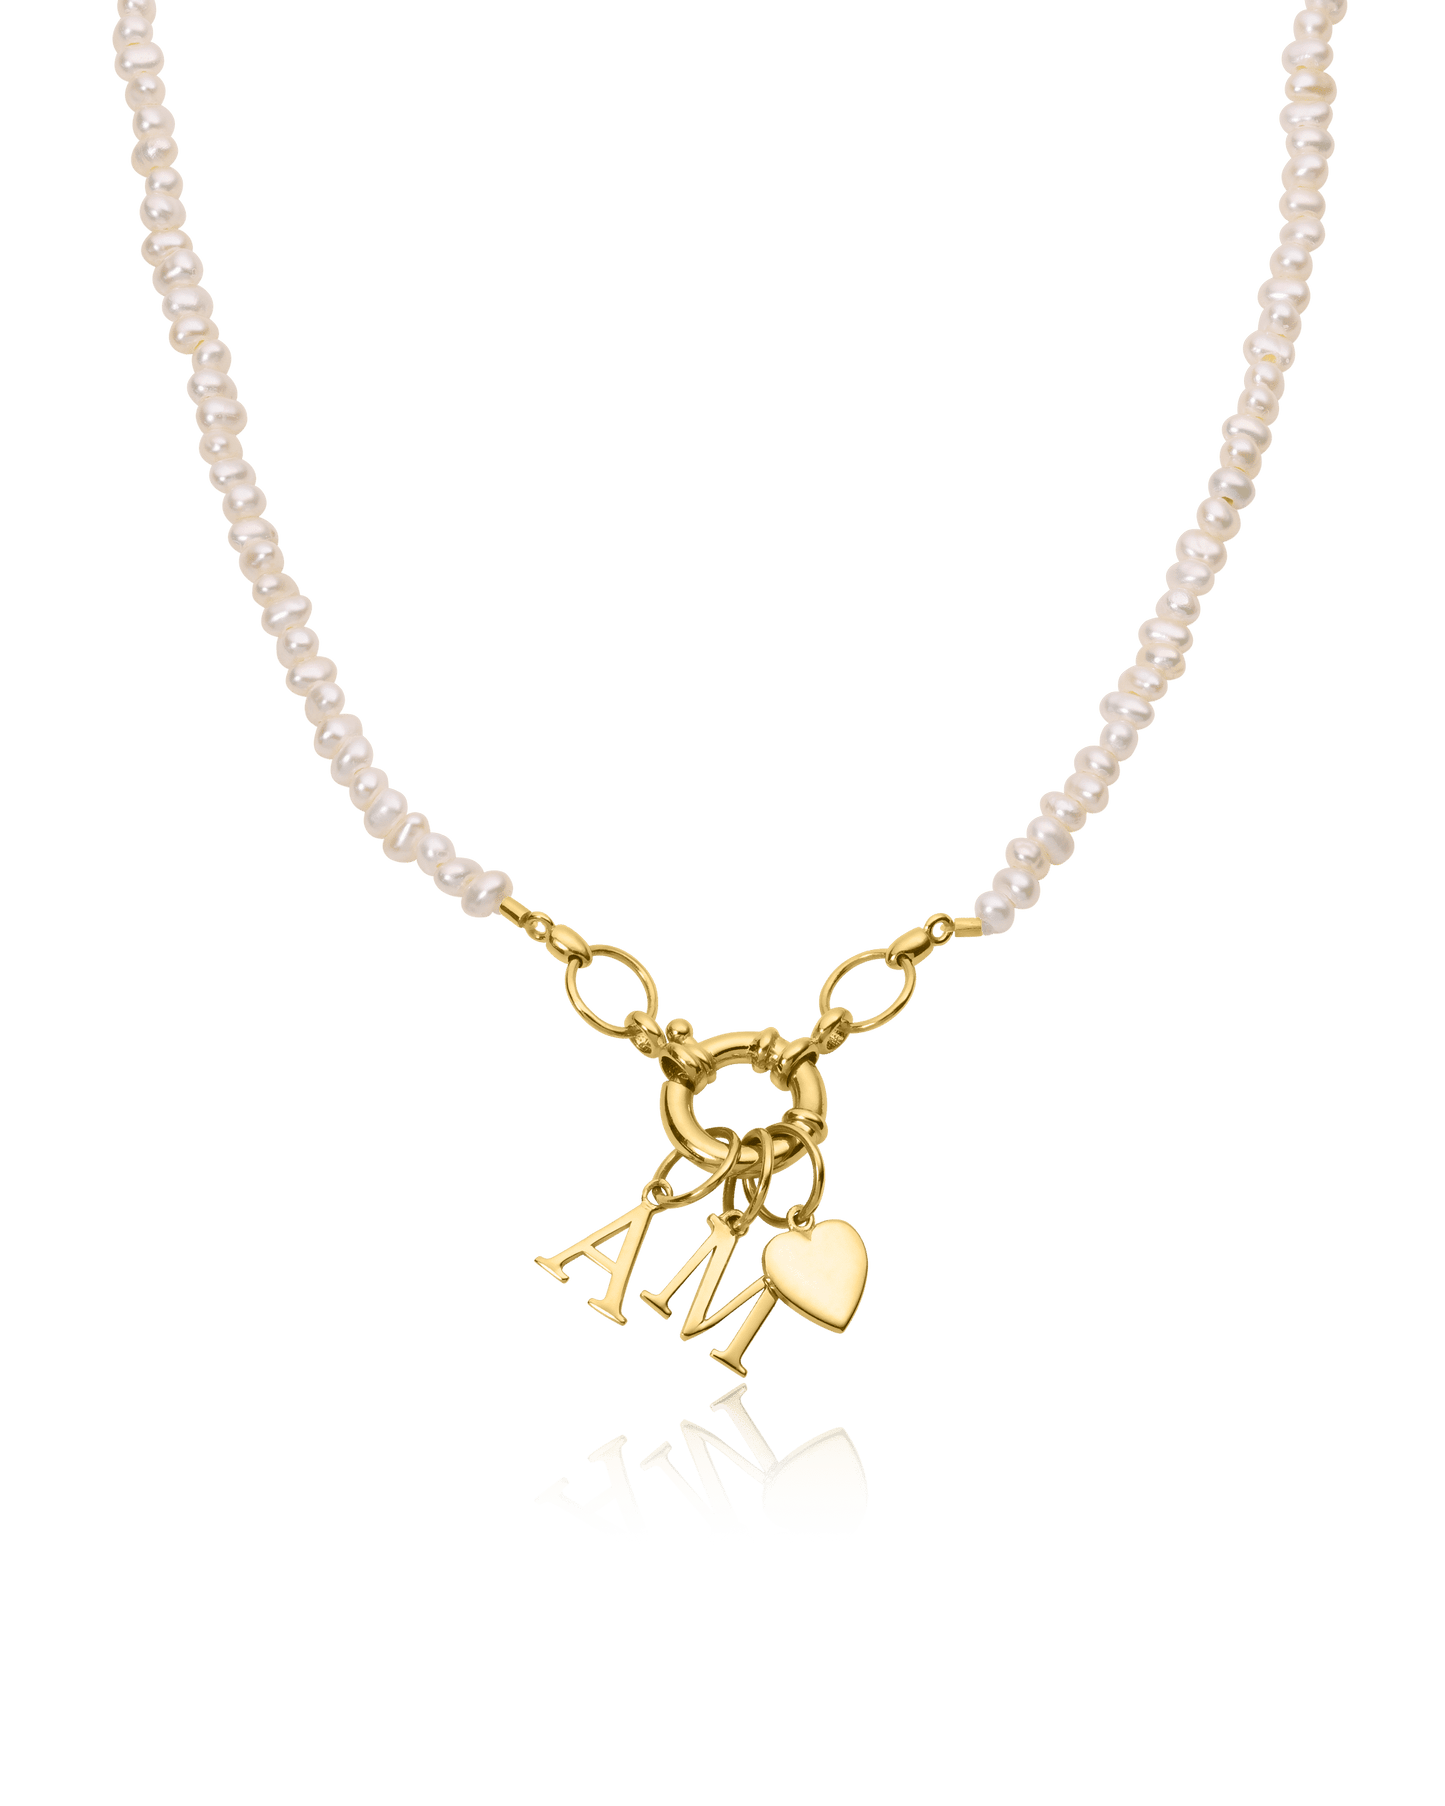 Watermelon Charm Lock Necklace - 18K Gold Vermeil Necklaces magal-dev Pearl (OUT OF STOCK) 1 Charm 16"